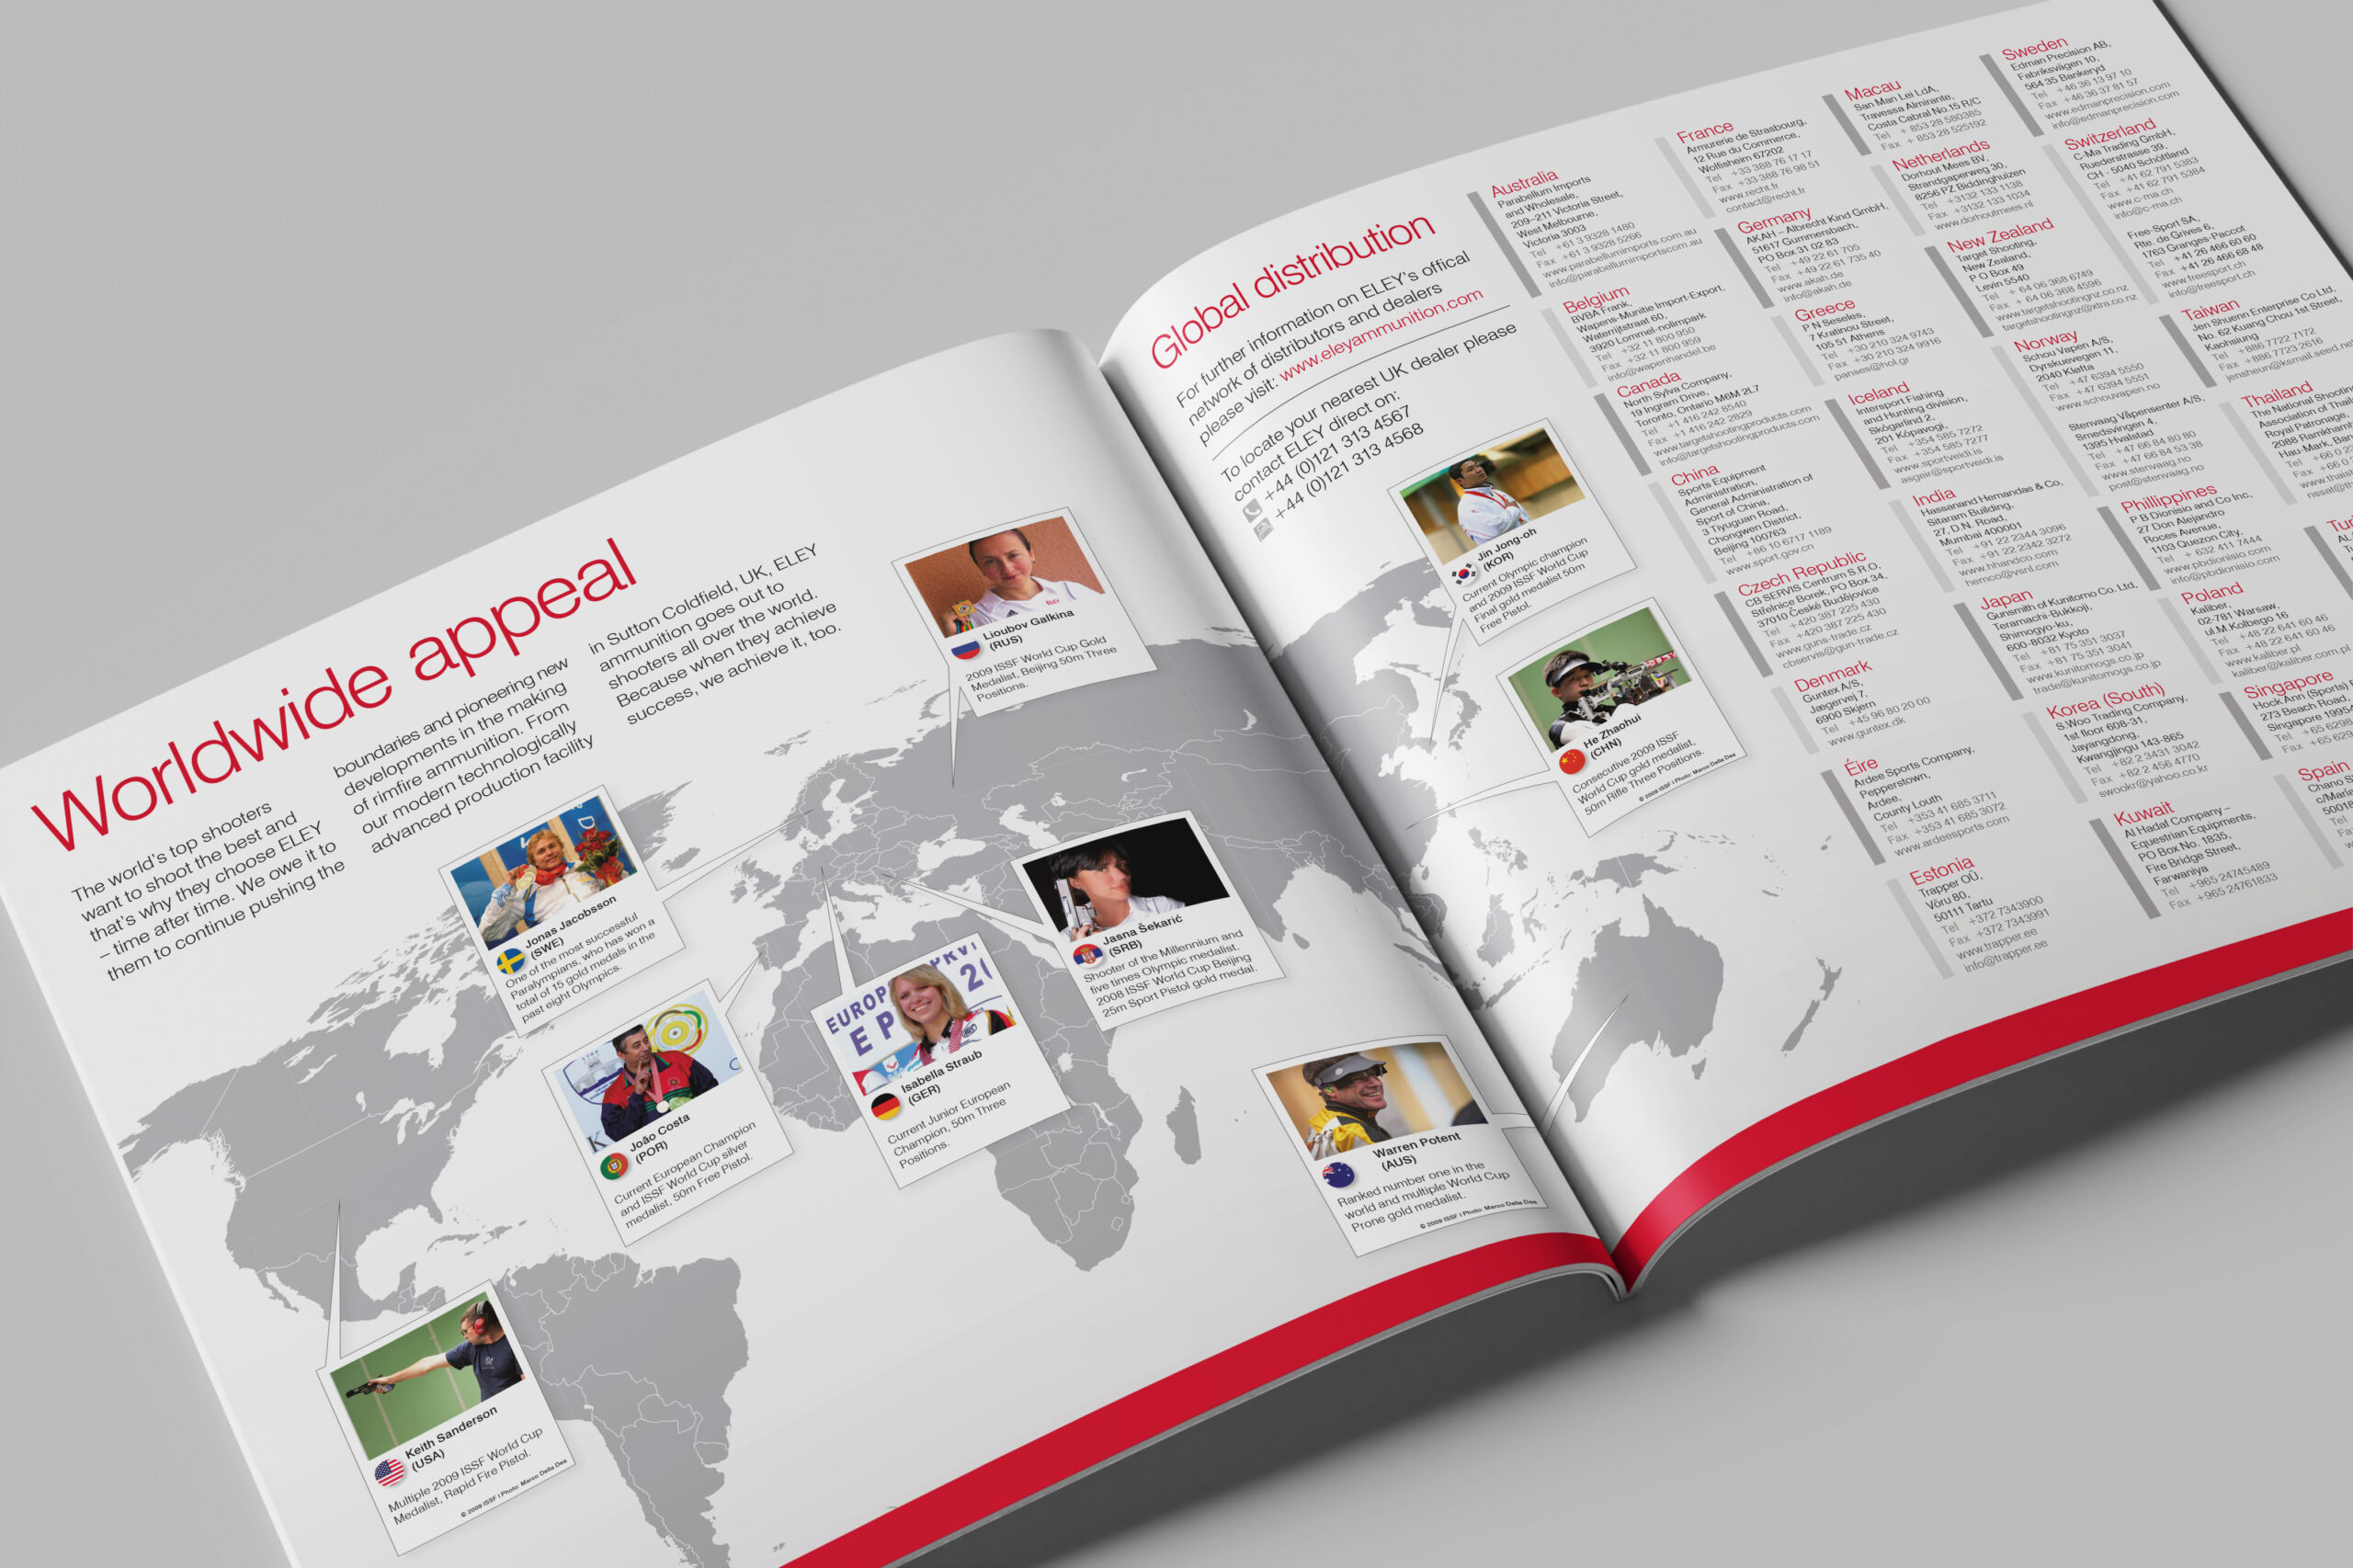 Double page spread from Eley 2011 Worldwide brochure showing a world map labelled with top-level shooters from different countries around the world. On the right-hand side there is a list of Eley suppliers grouped by country.